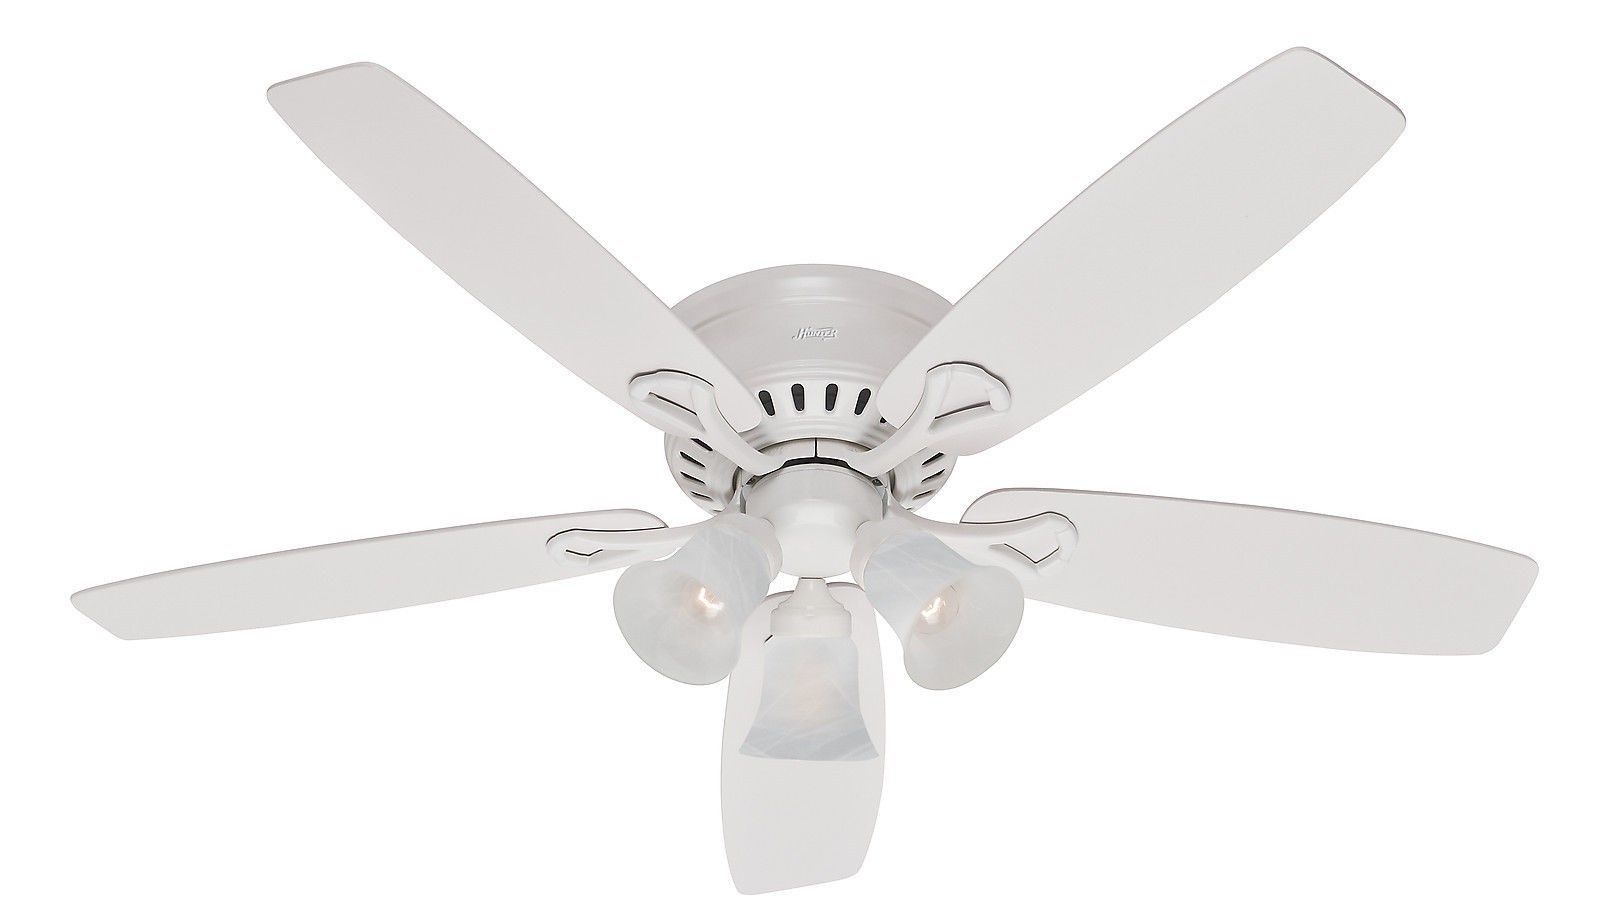 52 White Ceiling Fan With Light And Remotehunter low profile ceiling fan with light awesome hunter 52 white